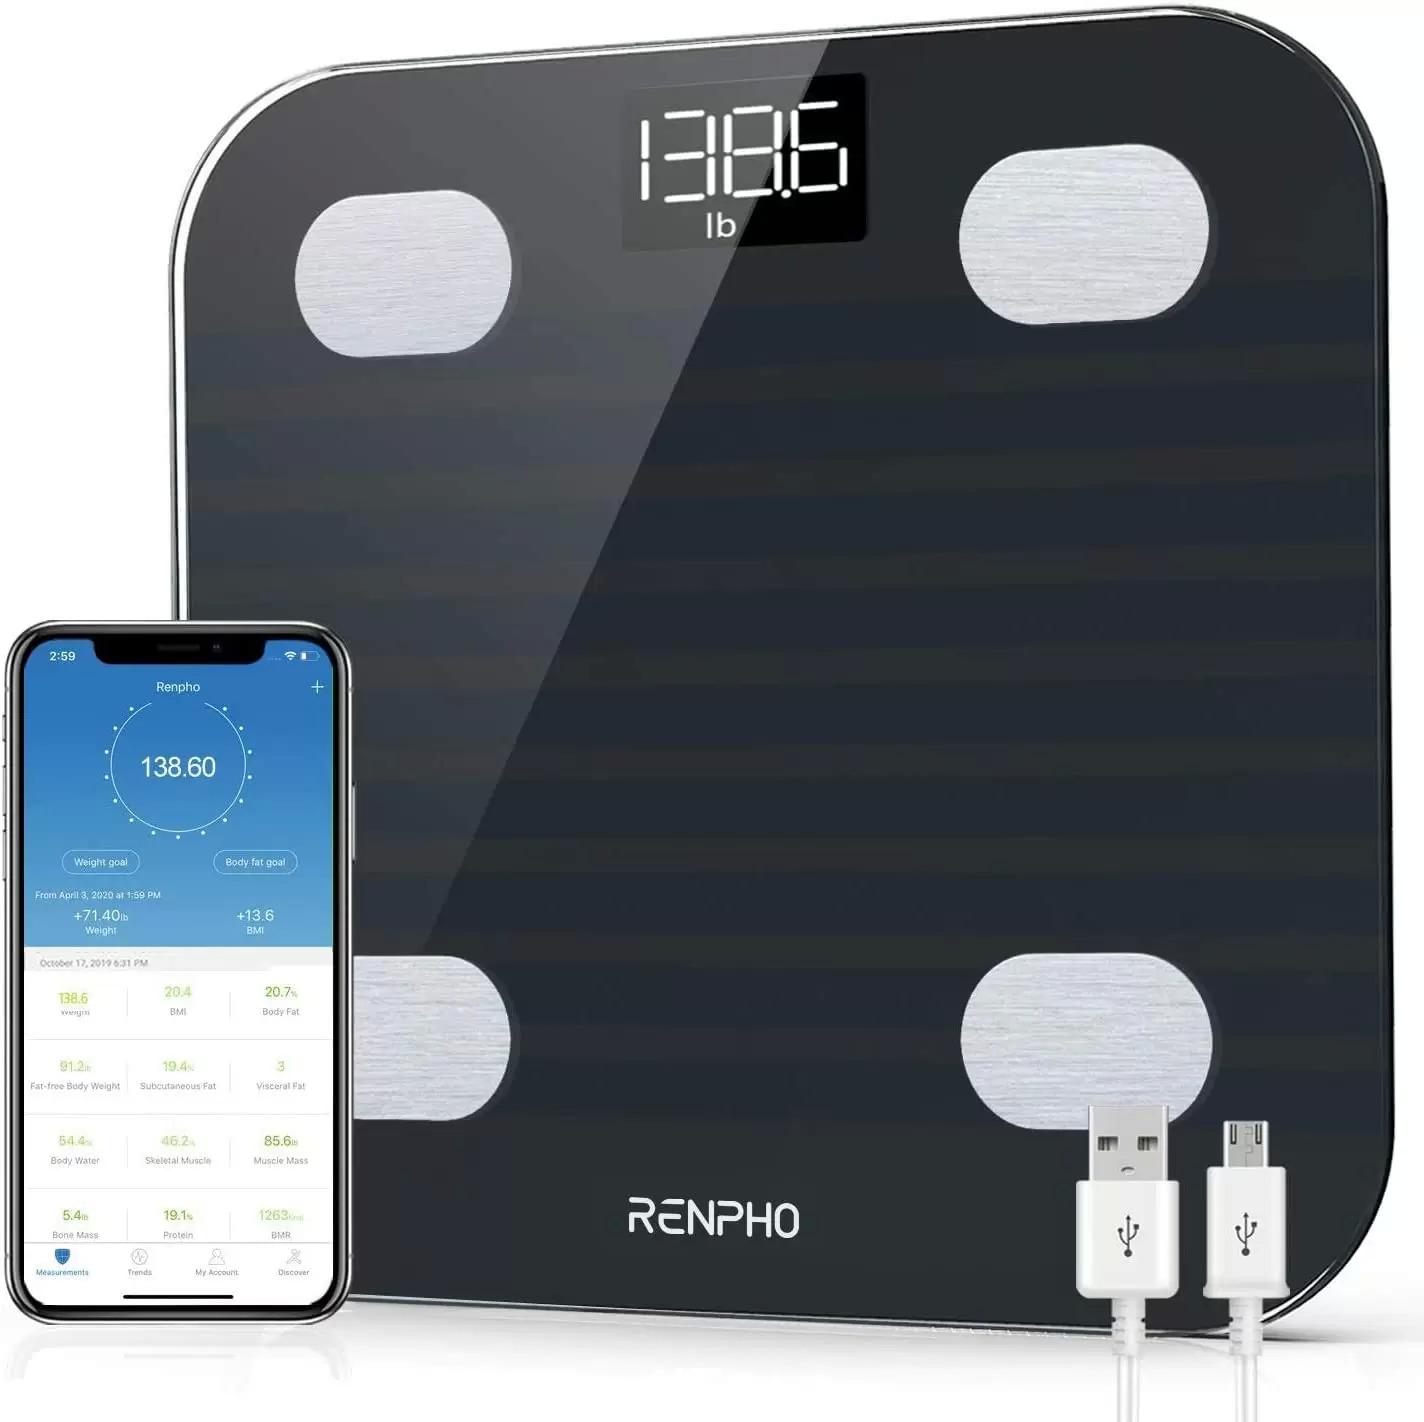 Renpho Bluetooth Body Fat BMI Weight Bathroom Scale for $17.99